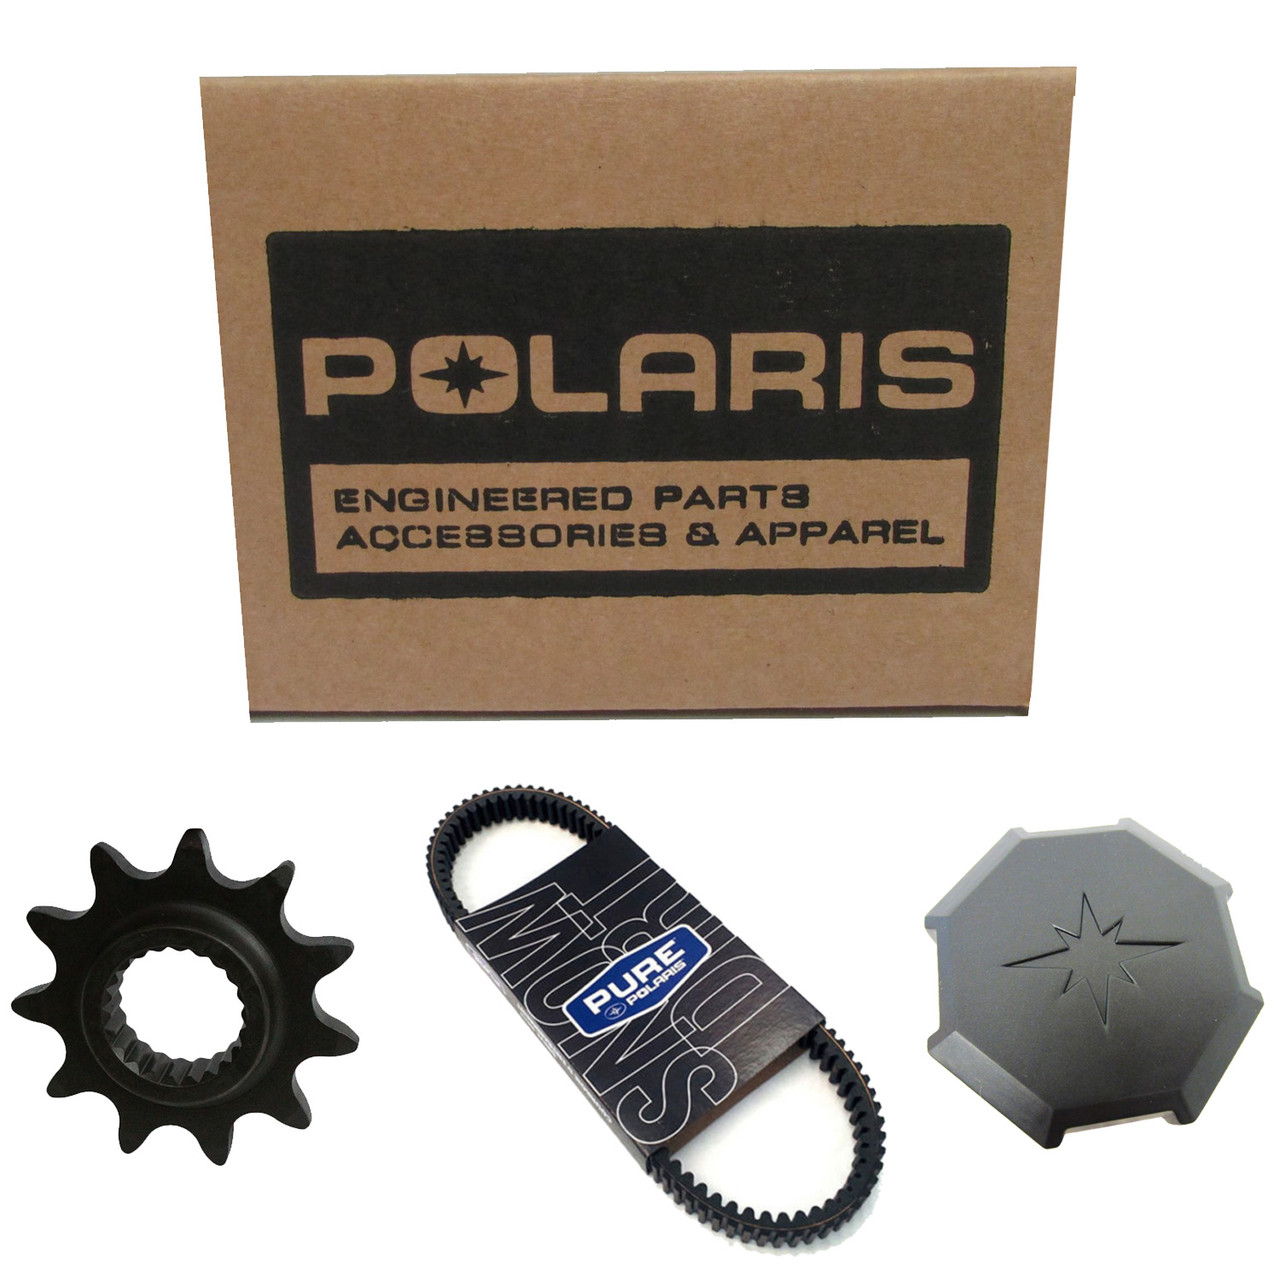 Polaris New OEM Cover-Side,Right Hand,250,Pwh-2, 5437327-566